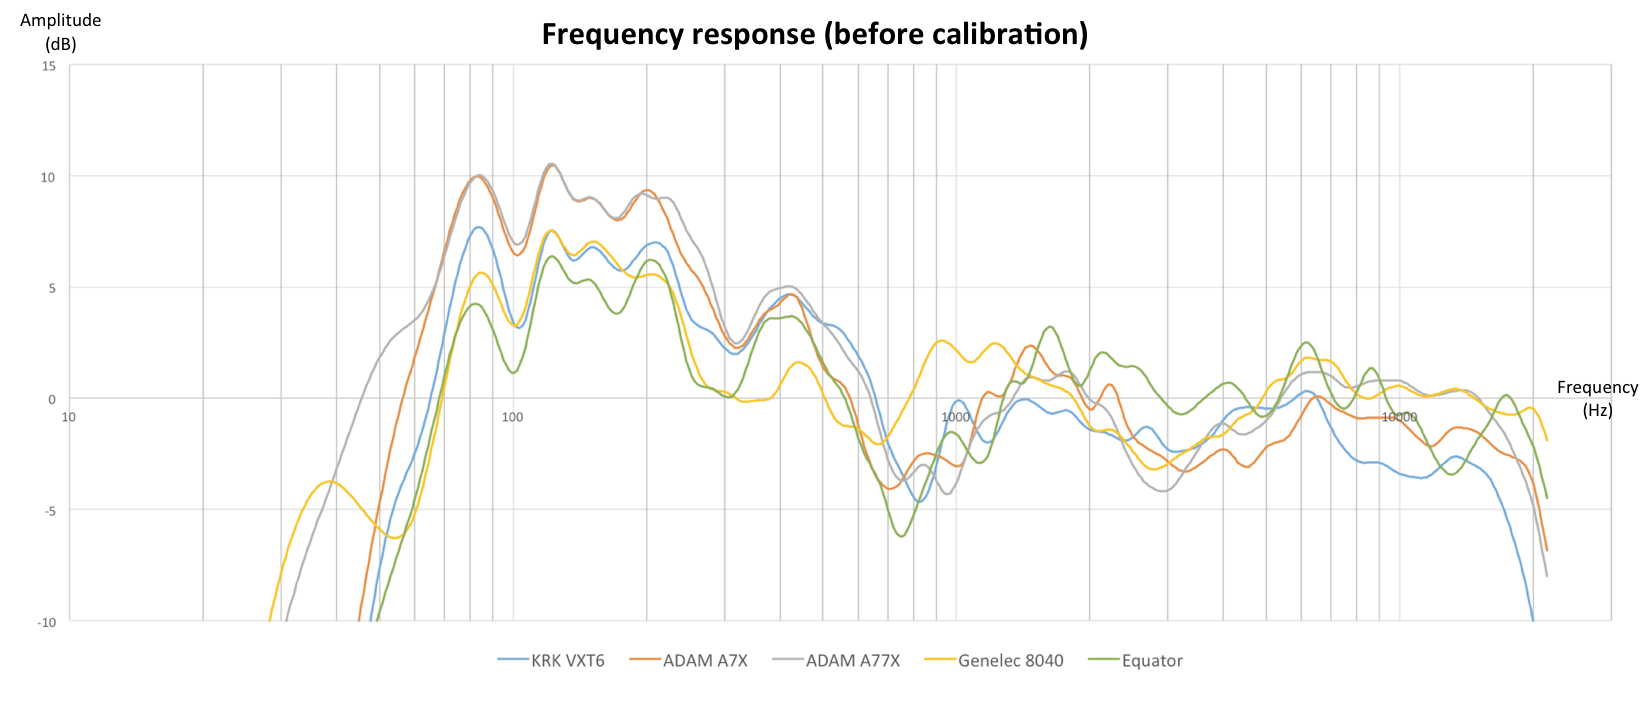 SW_C1_Frequency_response_before